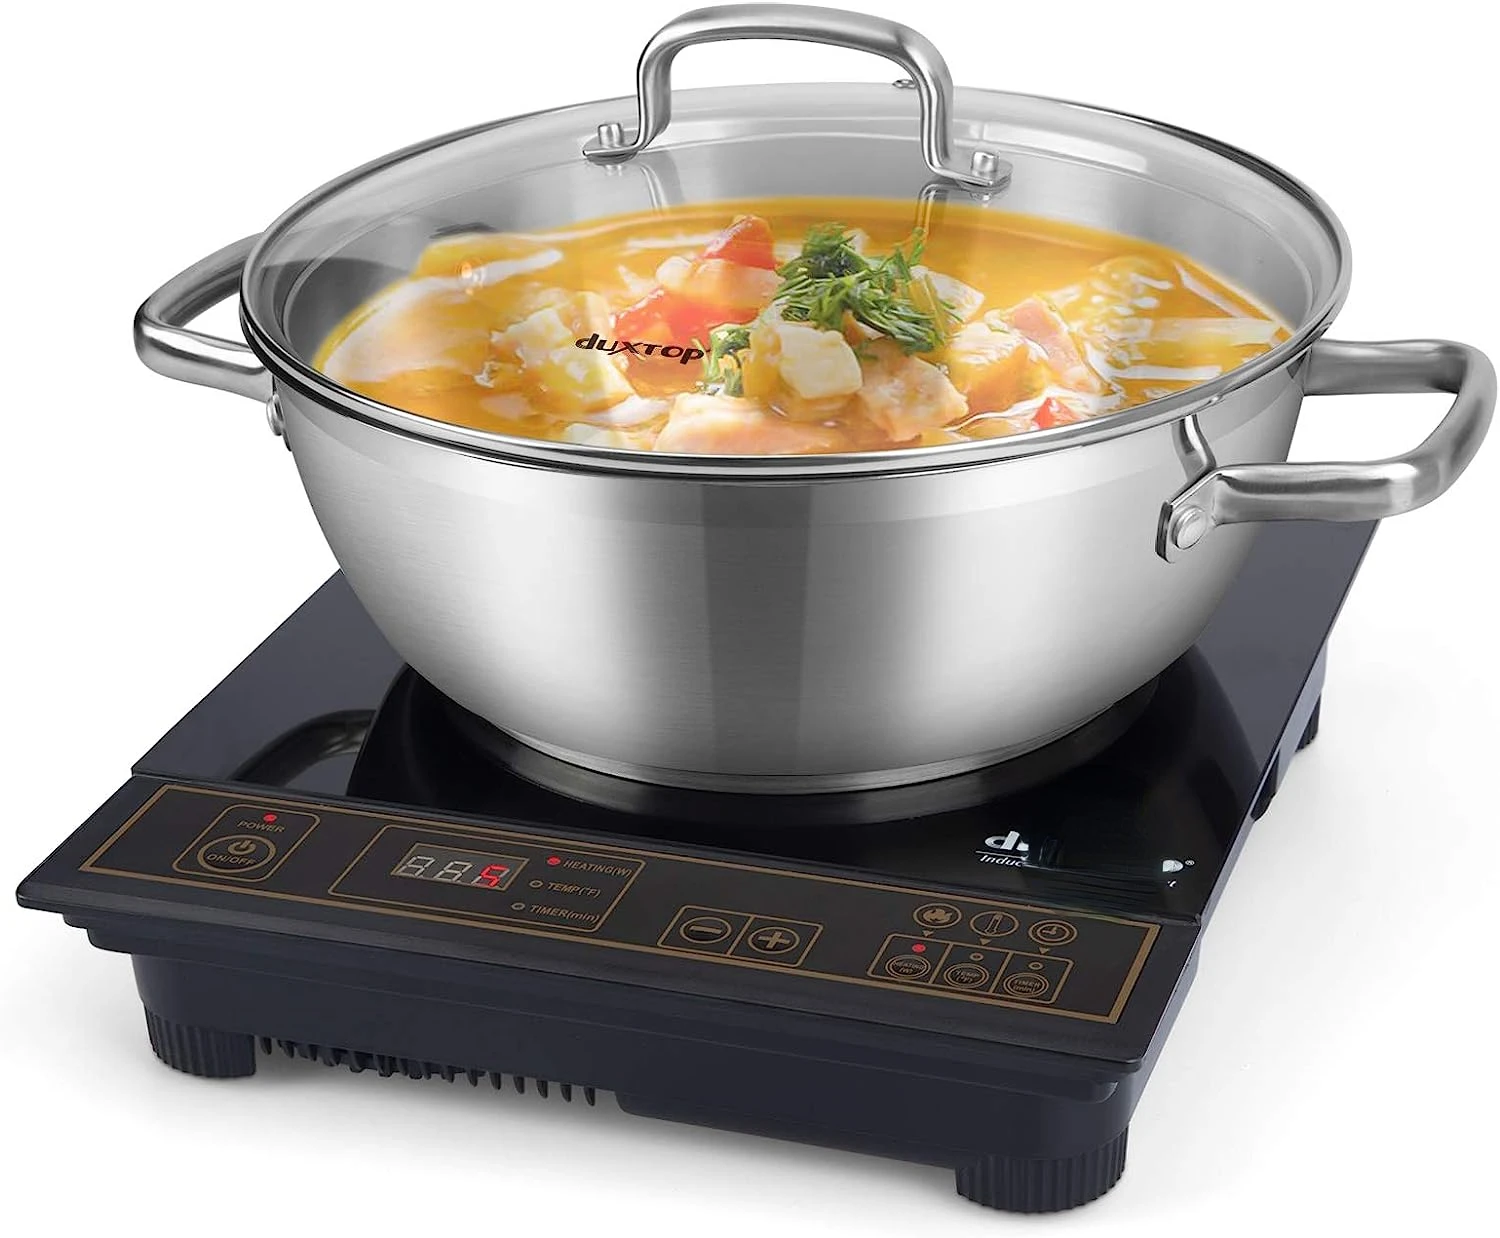 

Portable Induction Cooktop, Countertop Burner Included 5.7 Quarts Professional Stainless Steel Cooking Pot with Lid, Heavy -bond